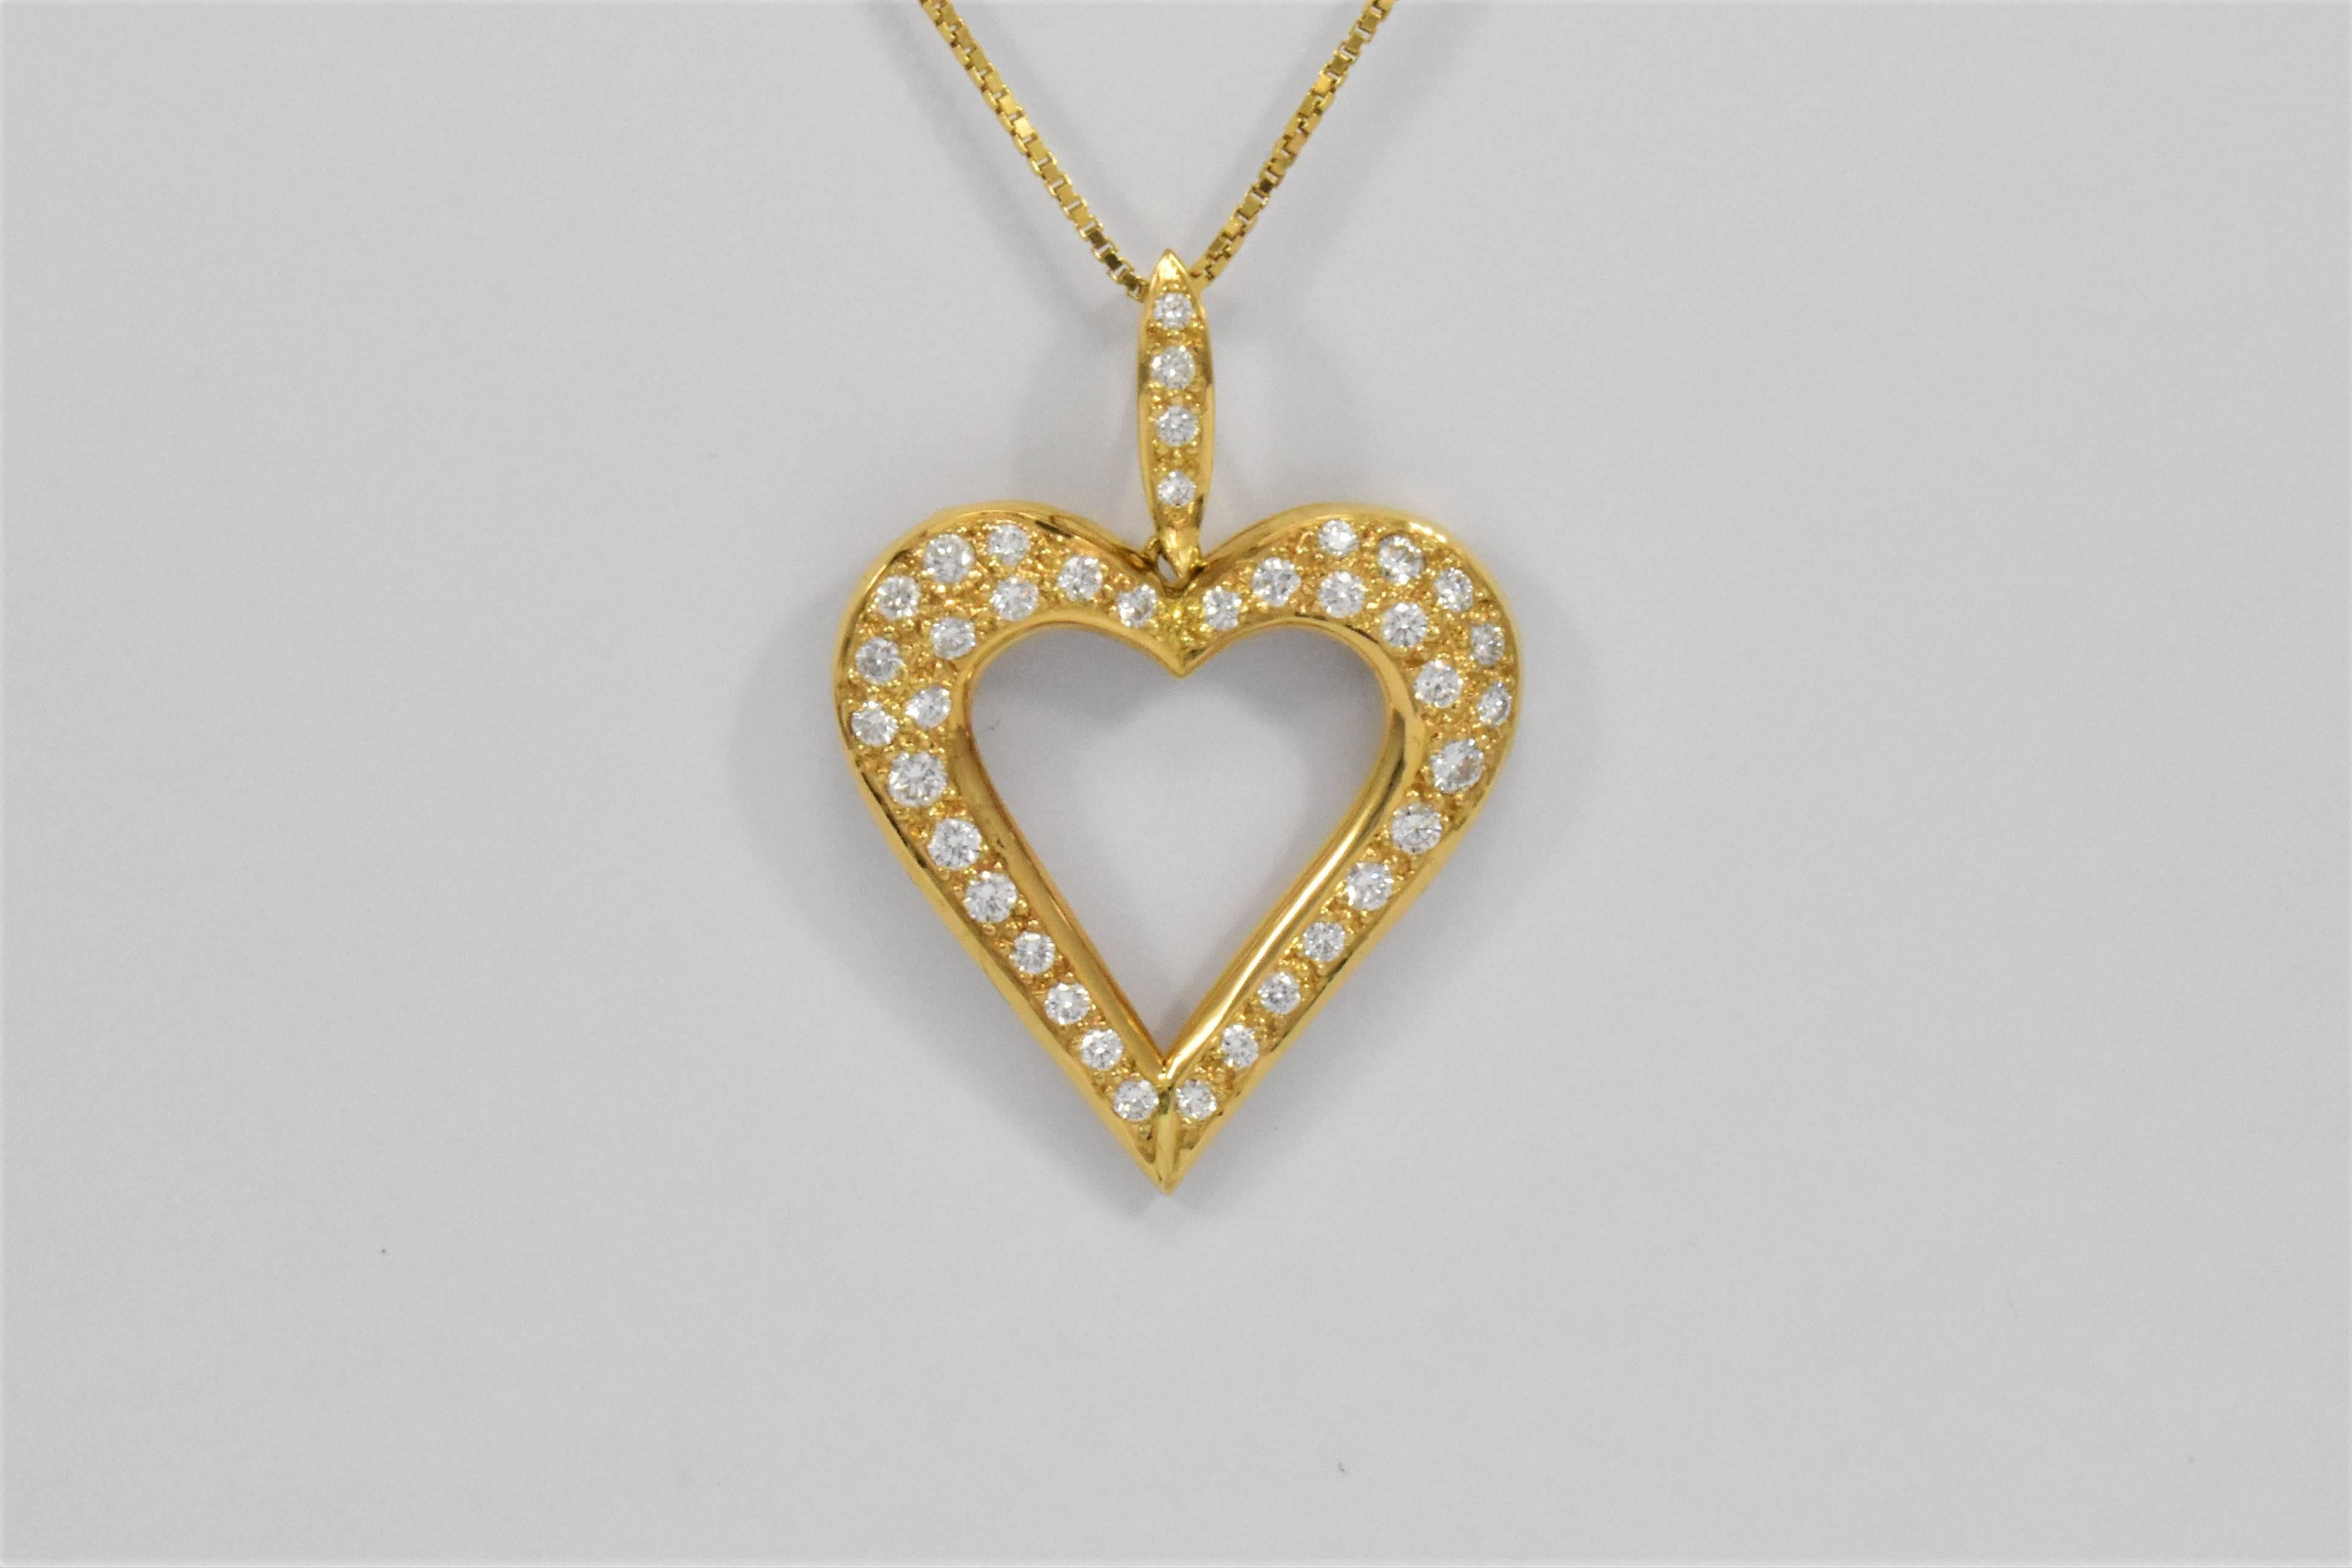 Daou Diamond and Yellow Gold Large Open Heart Pendant Necklace In New Condition For Sale In London, EMEA - British Isles